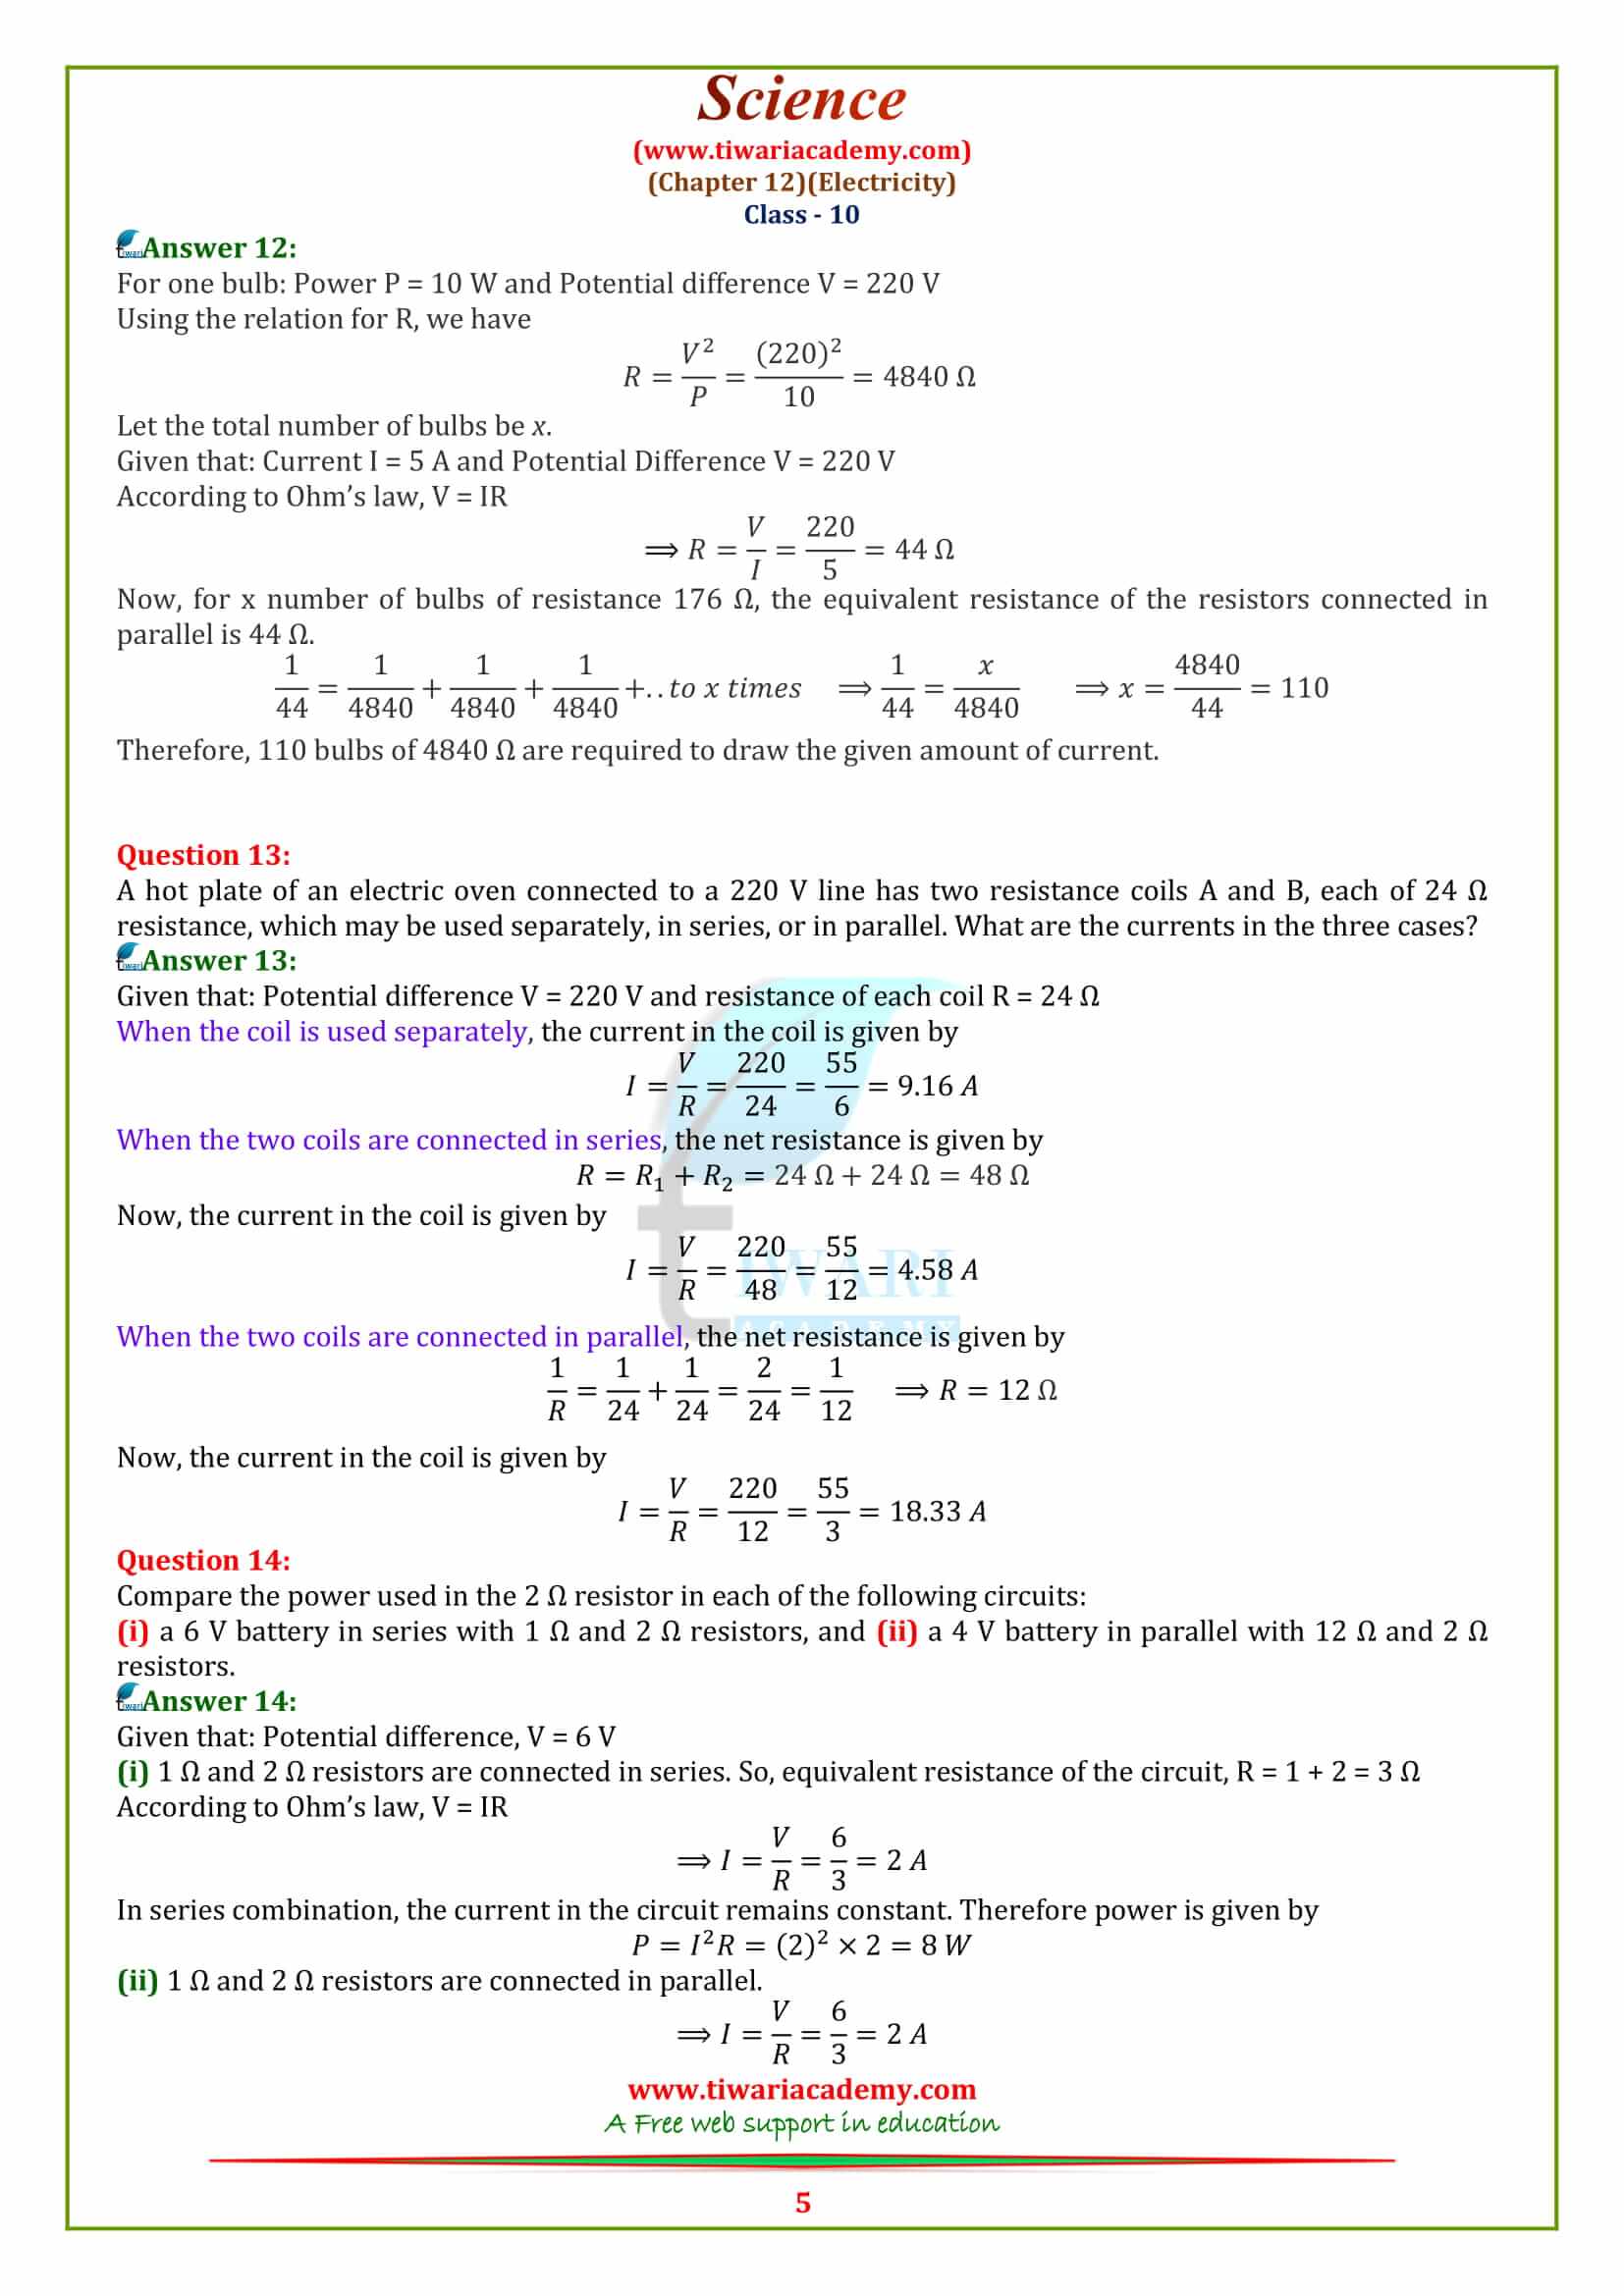 NCERT Solutions for Class 10 Science Chapter 12 Electricity Exercises free download